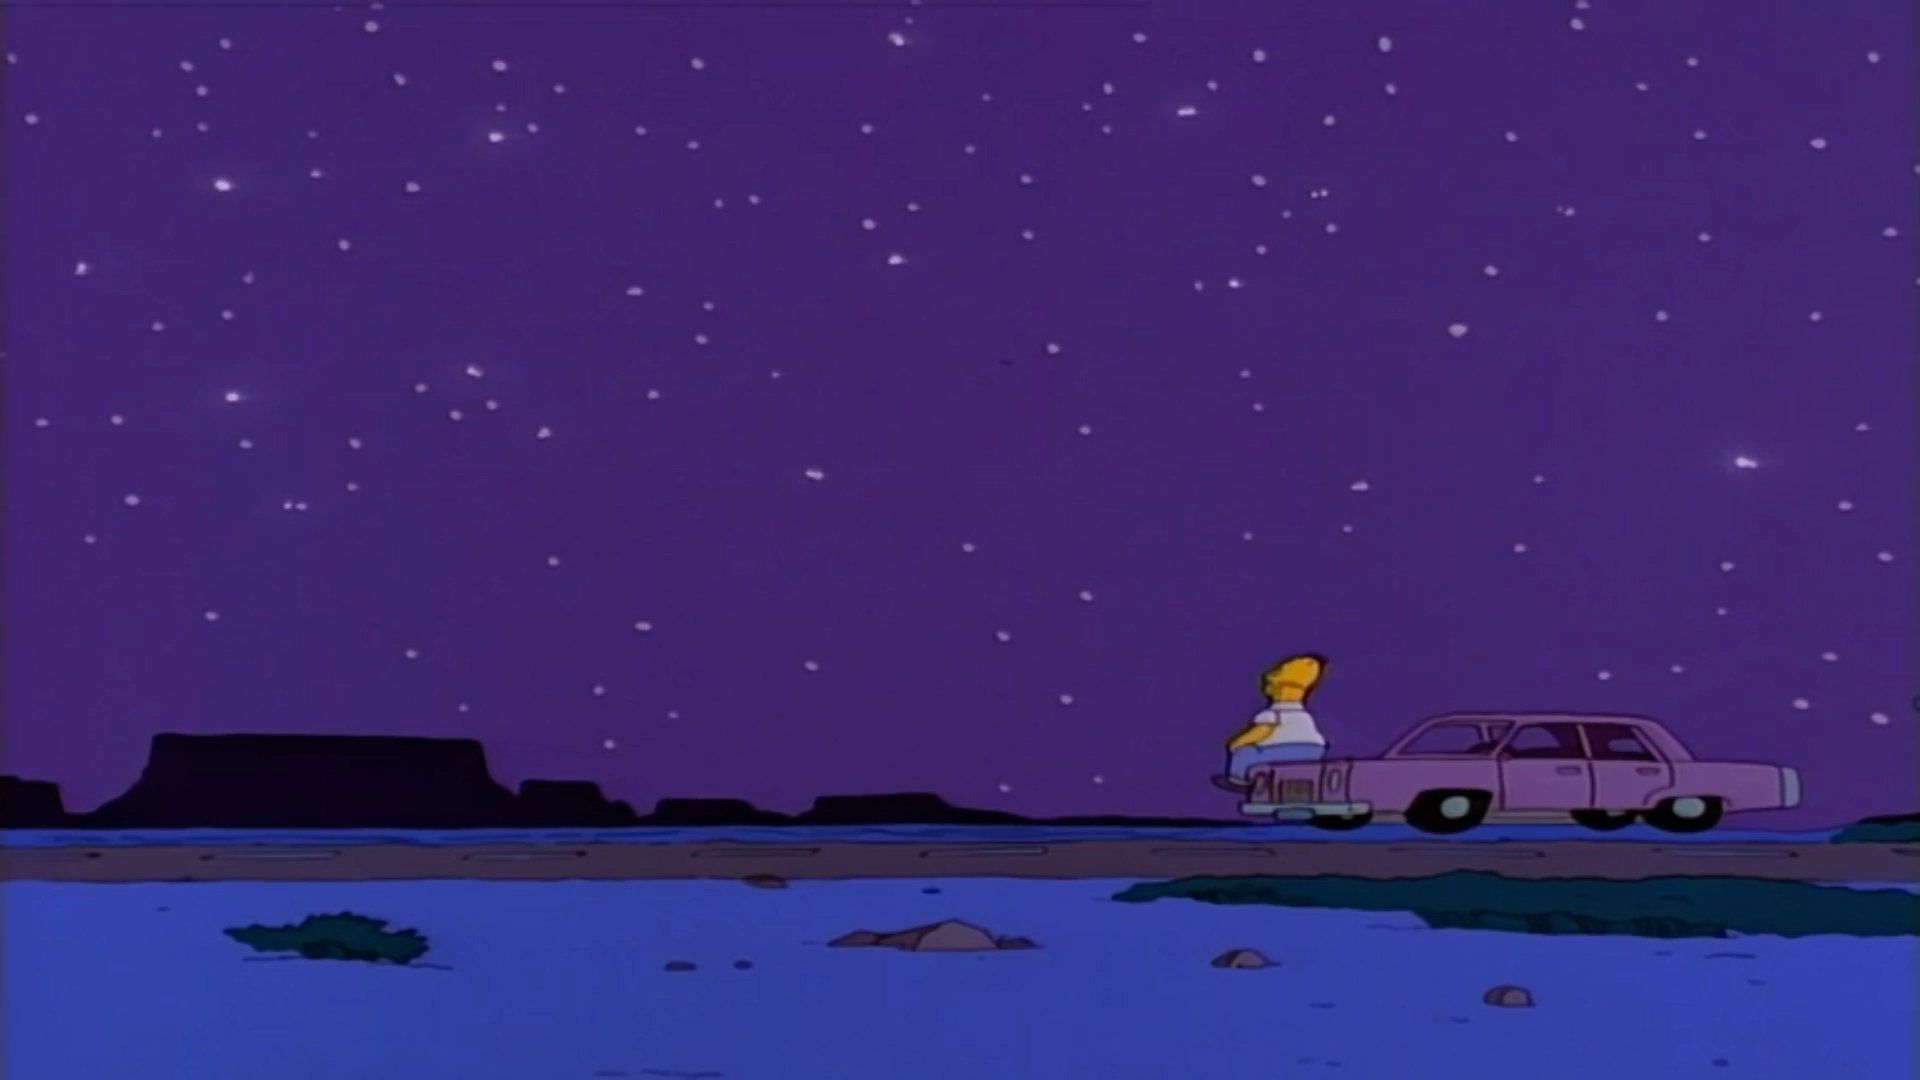 Take some Twitter time out and appreciate these beautiful final shots from #TheSimpsons